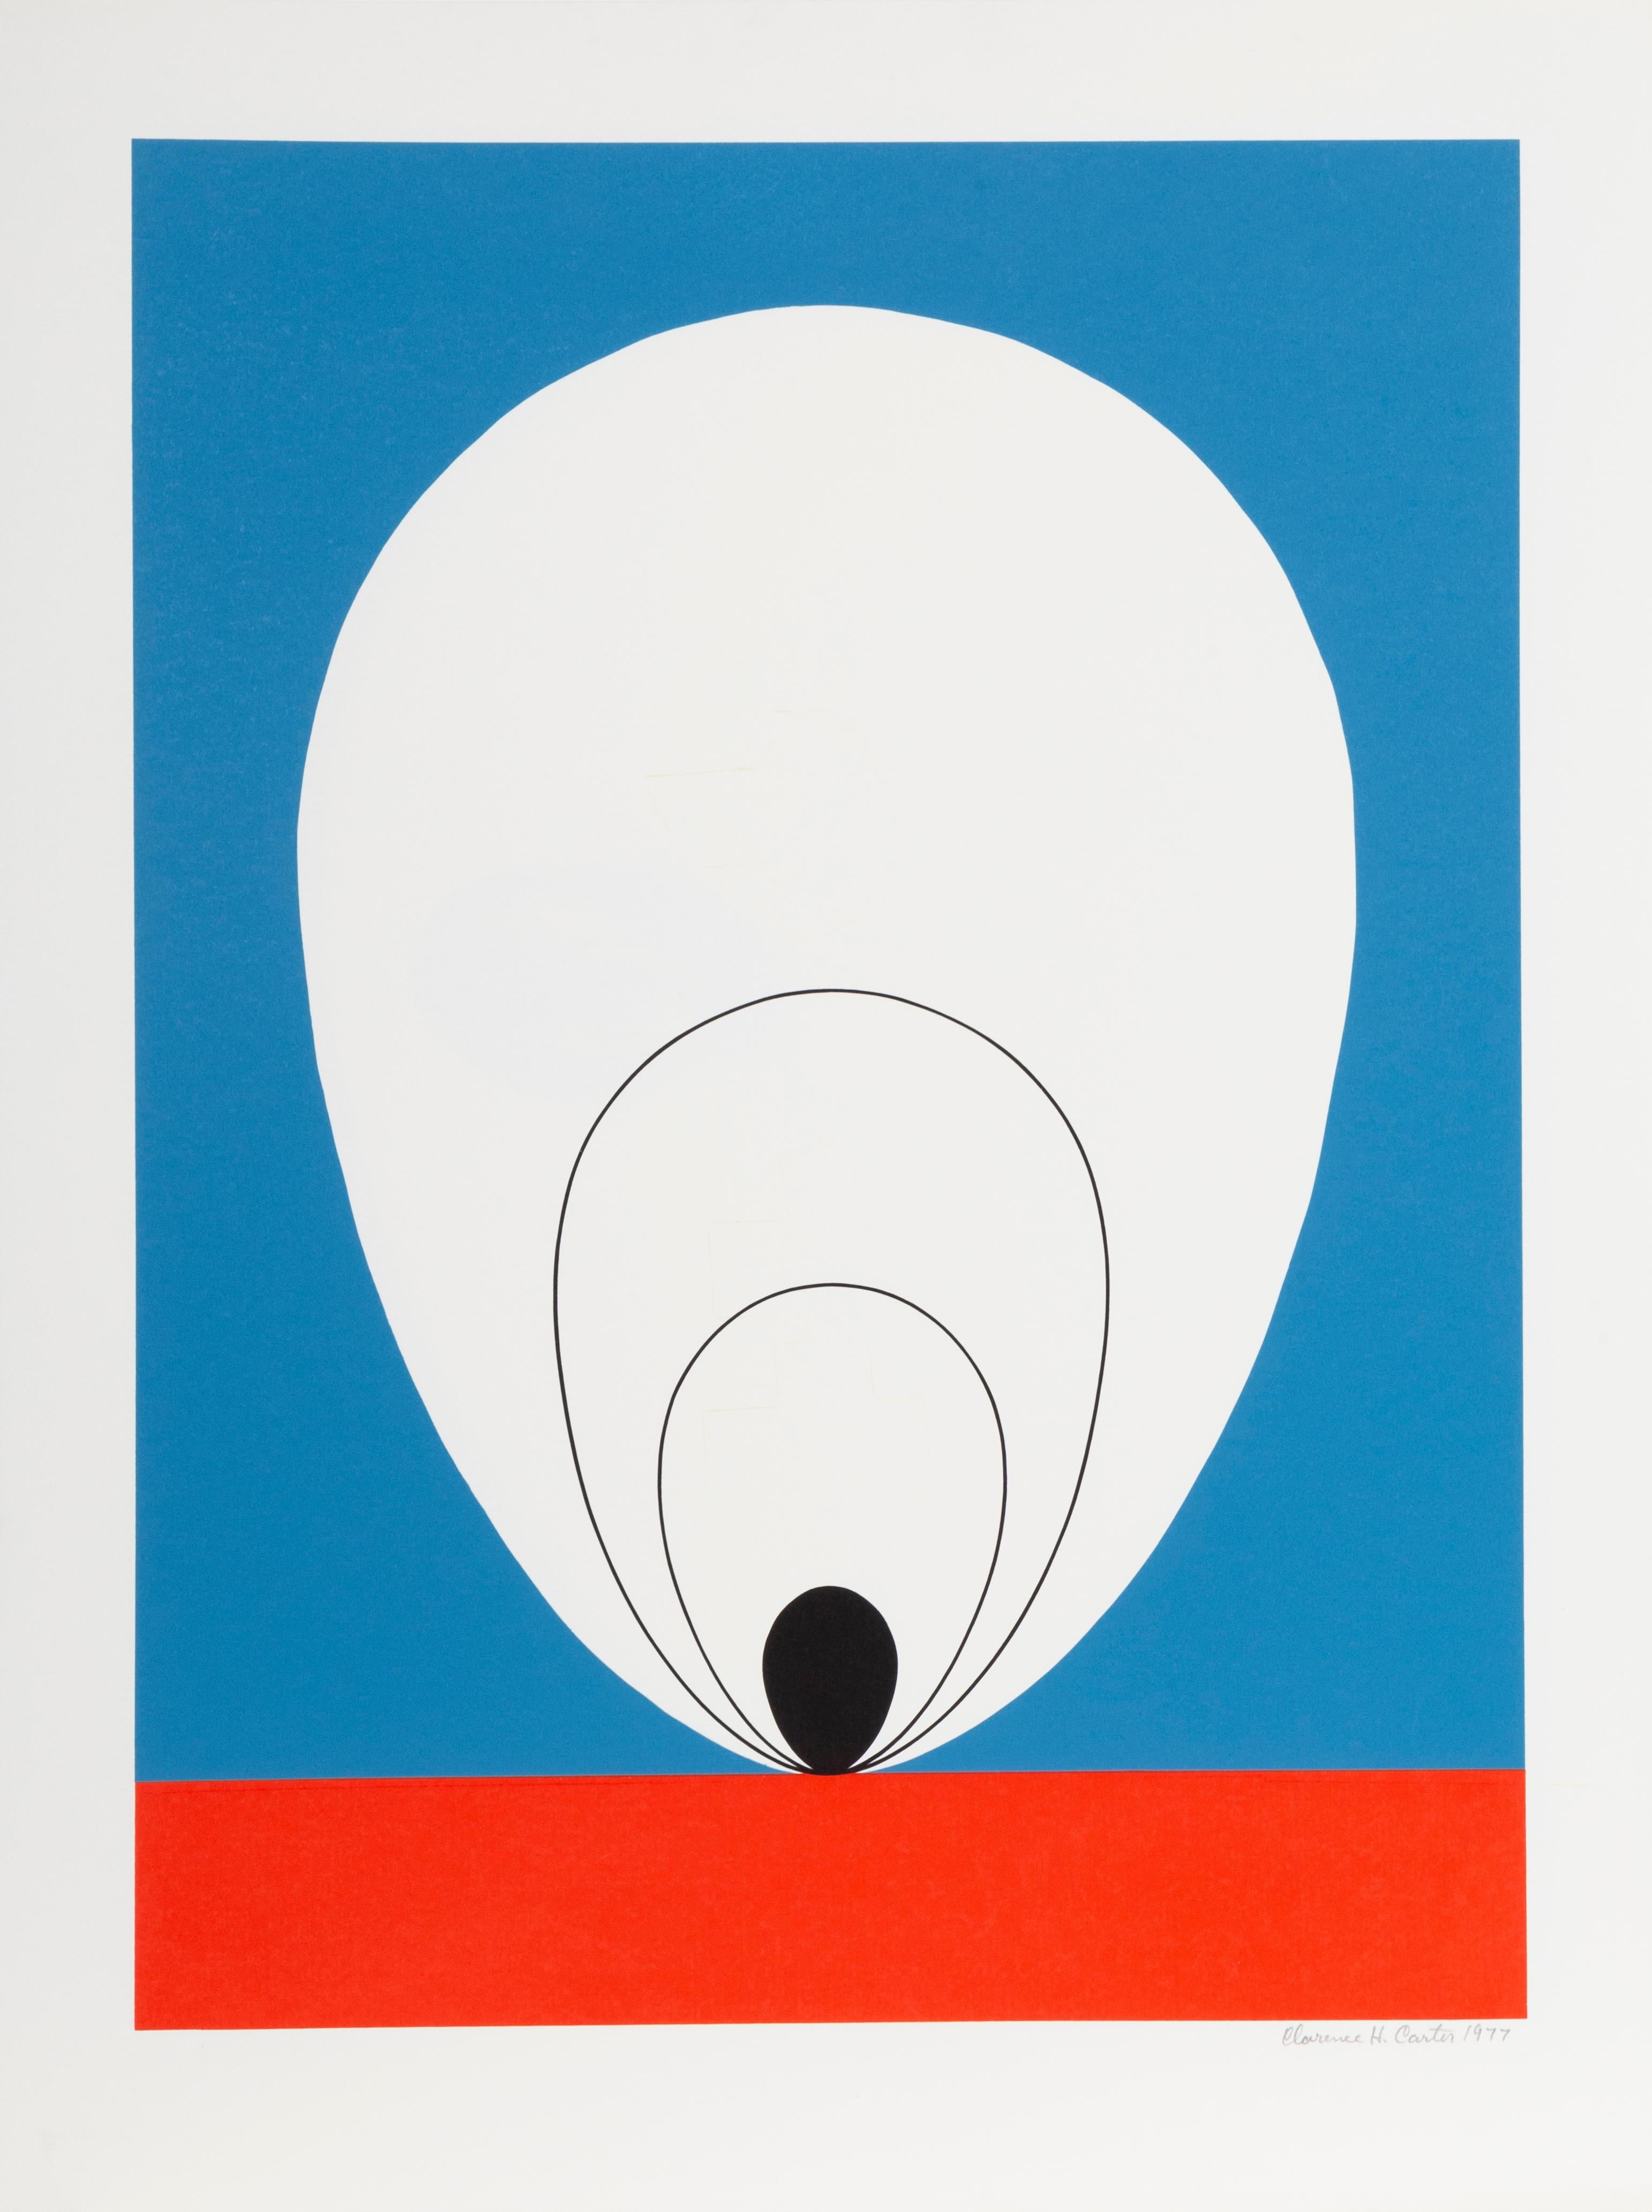 Artist: Clarence Holbrook Carter, American (1904 - 2000)
Title: Tulip
Year: 1978
Medium: Silkscreen, signed and numbered in pencil
Edition: 200
Paper Size: 35 x 25.75 inches